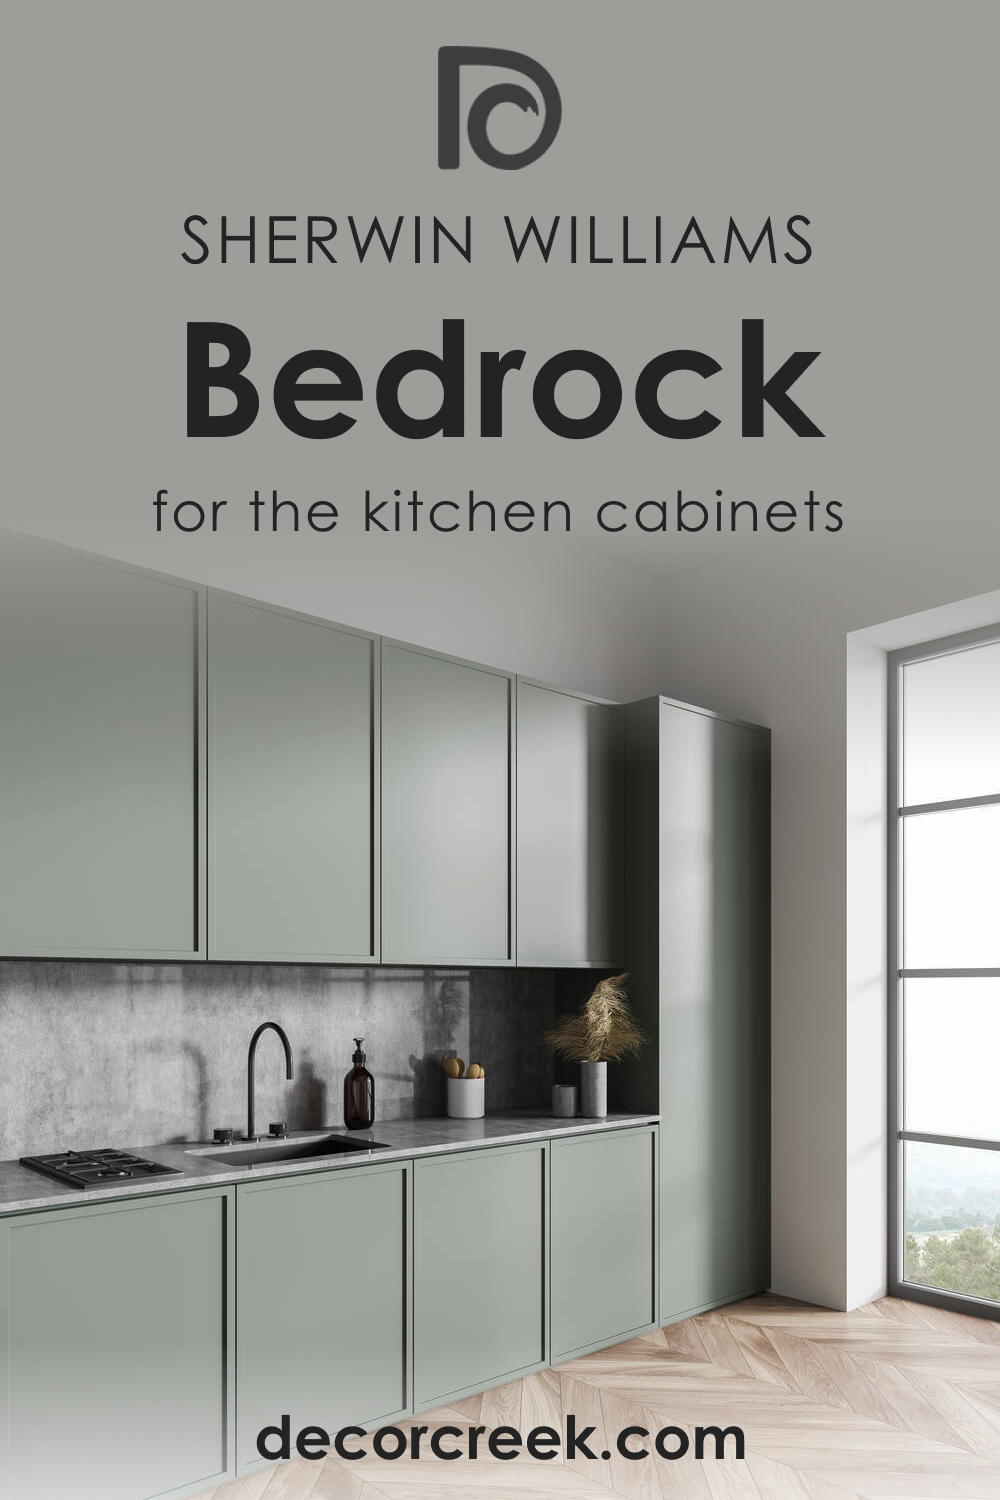 How to Use SW 9563 Bedrock for the Kitchen Cabinets?